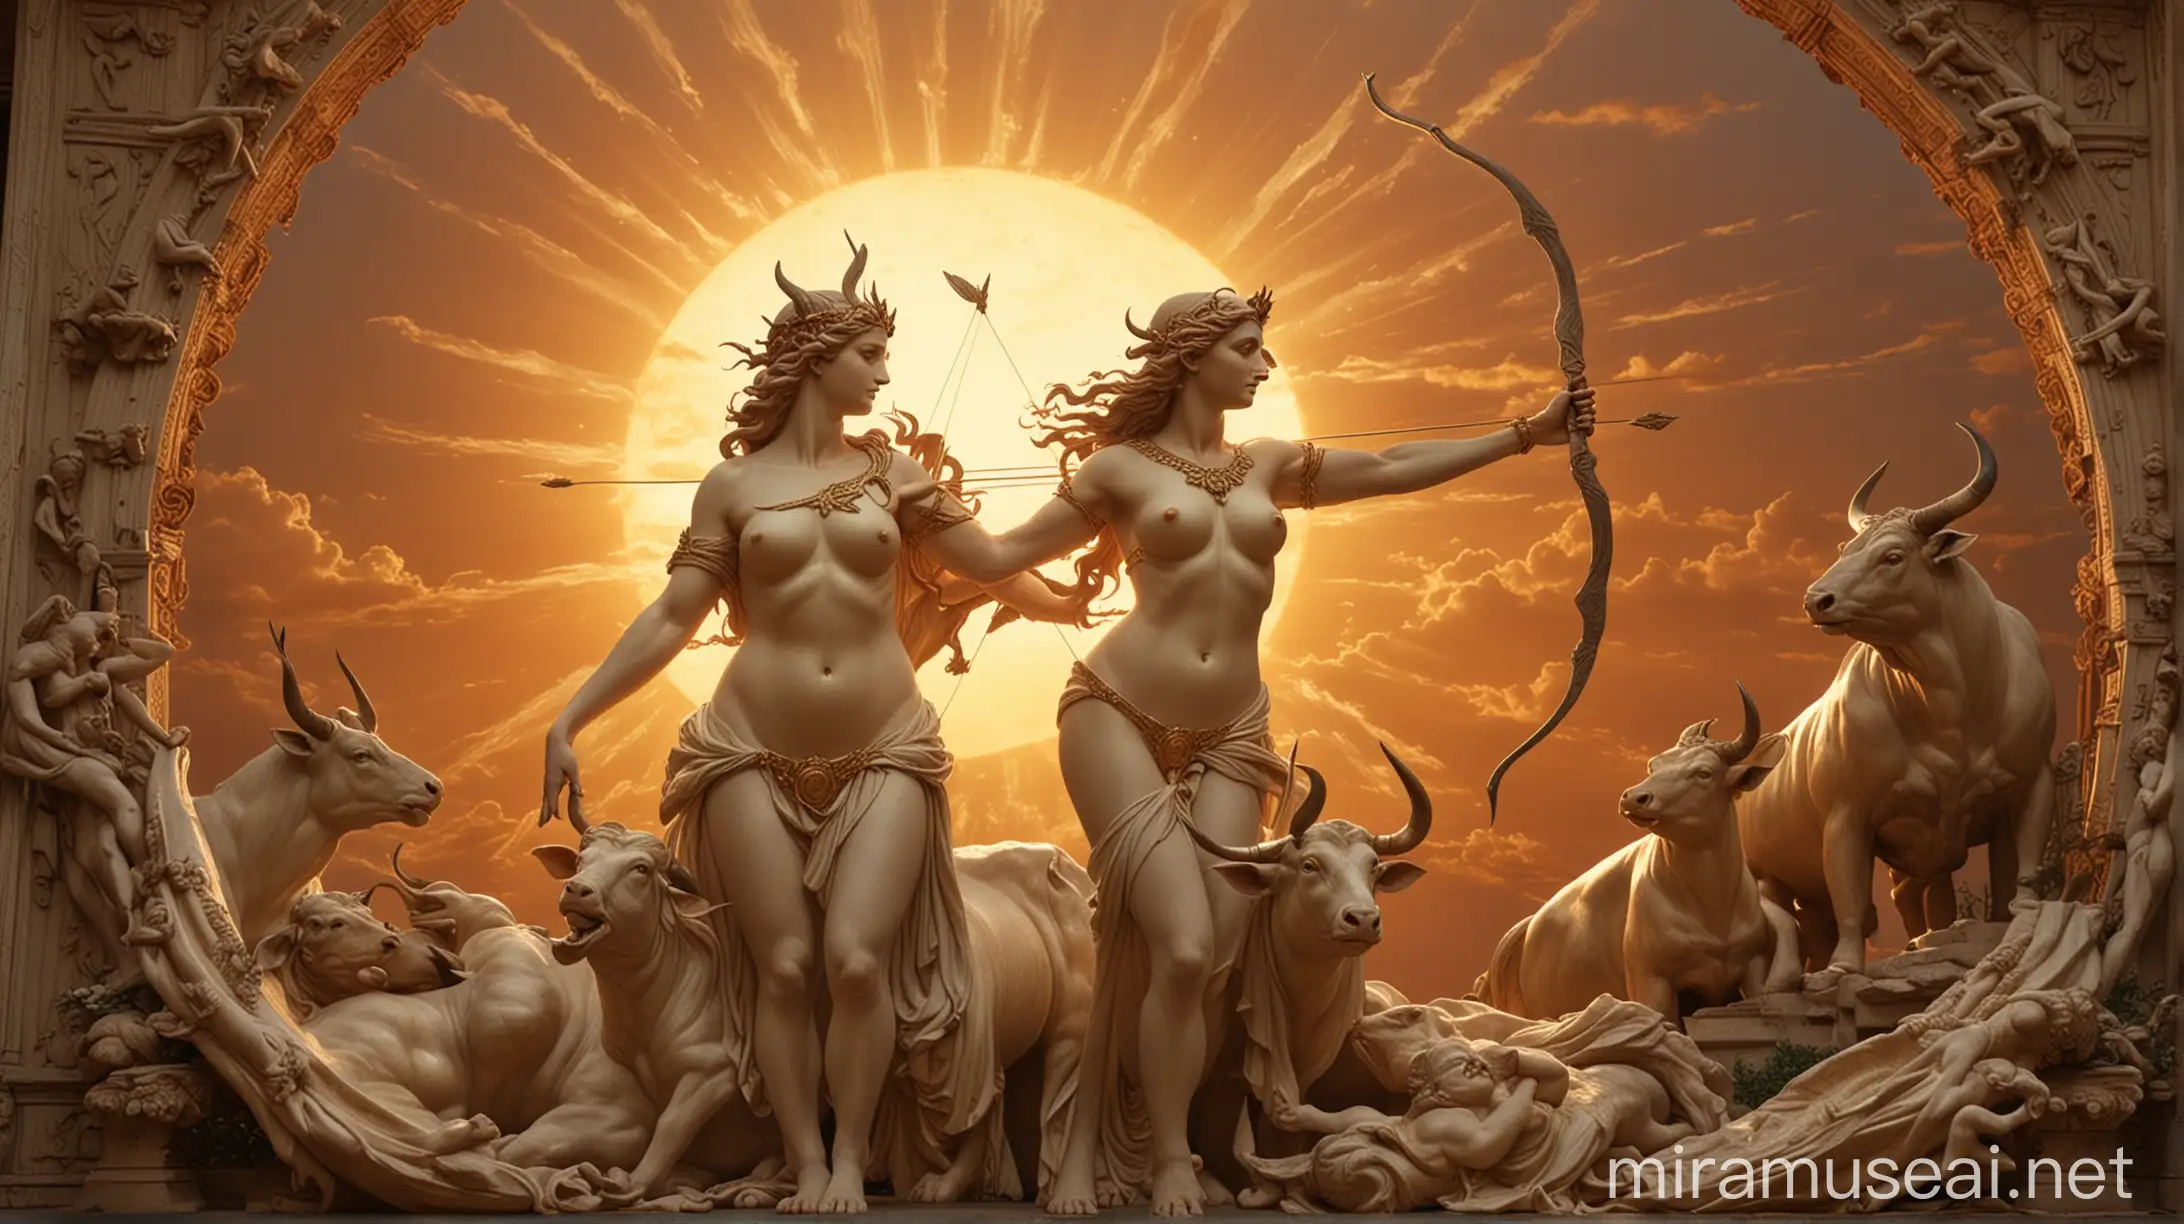 A huge bull in the center with the radiant Sun behind him. On the left side of the Sun, the goddess Aphrodite, sensualizing with her curves and full breasts and with a melancholic expression. To the right side of the Sun, the goddess Artemis with a wrathful expression, bow and arrows. The setting is enriched by antique-style details and golden tones.